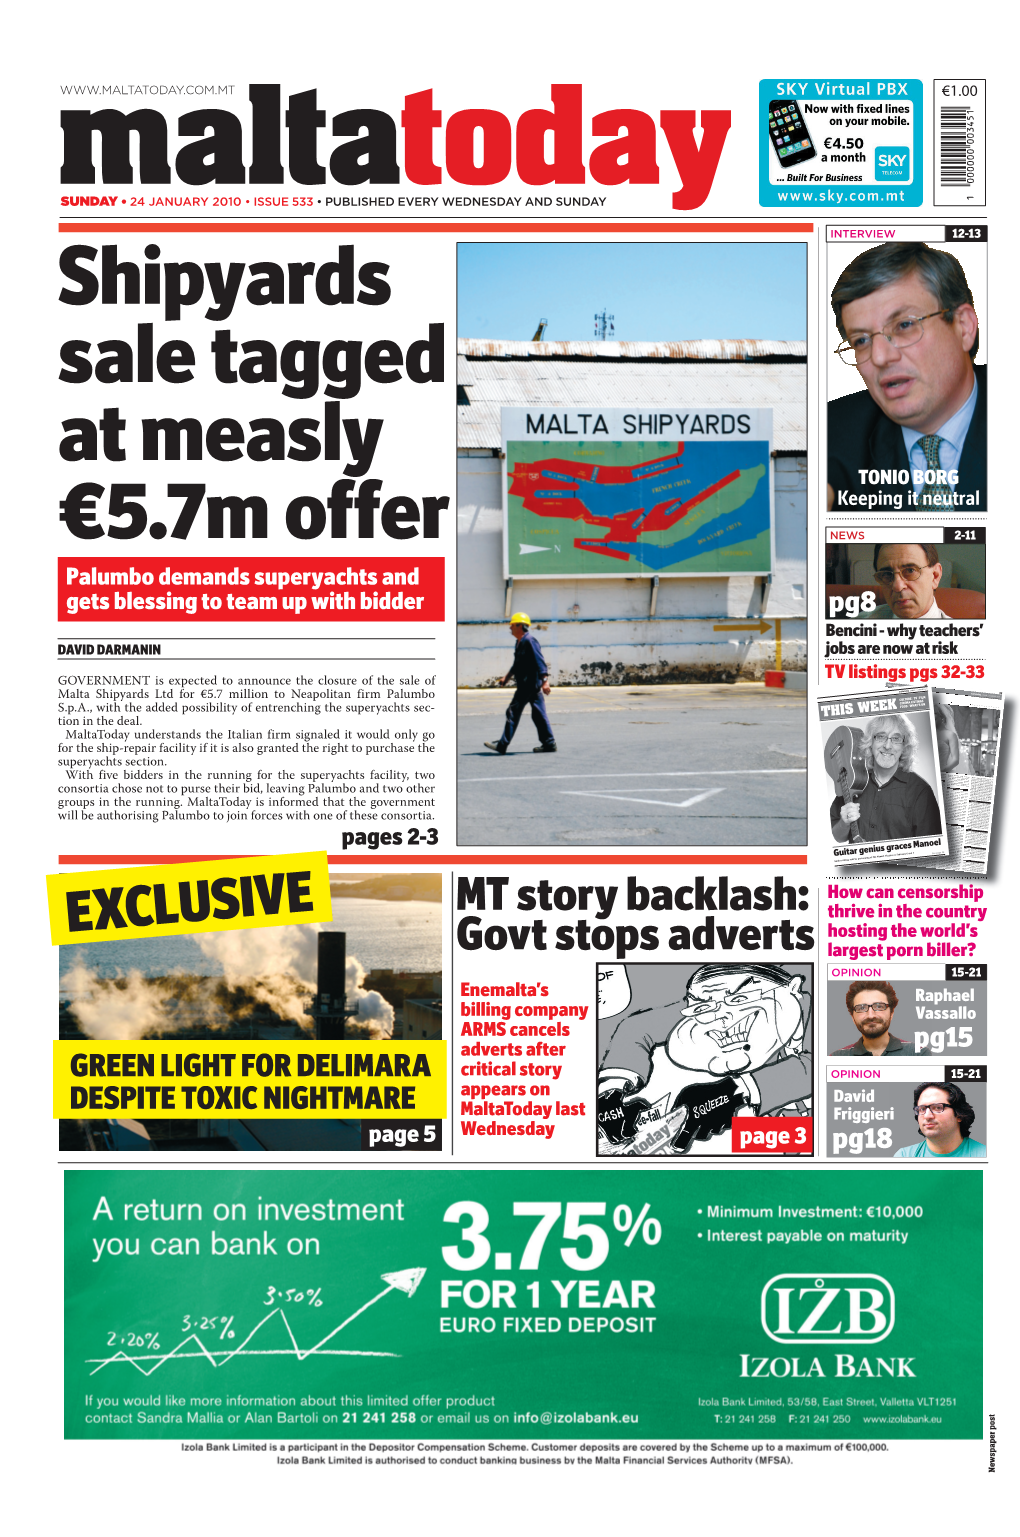 Shipyards Sale Tagged at Measly €5.7M Offer